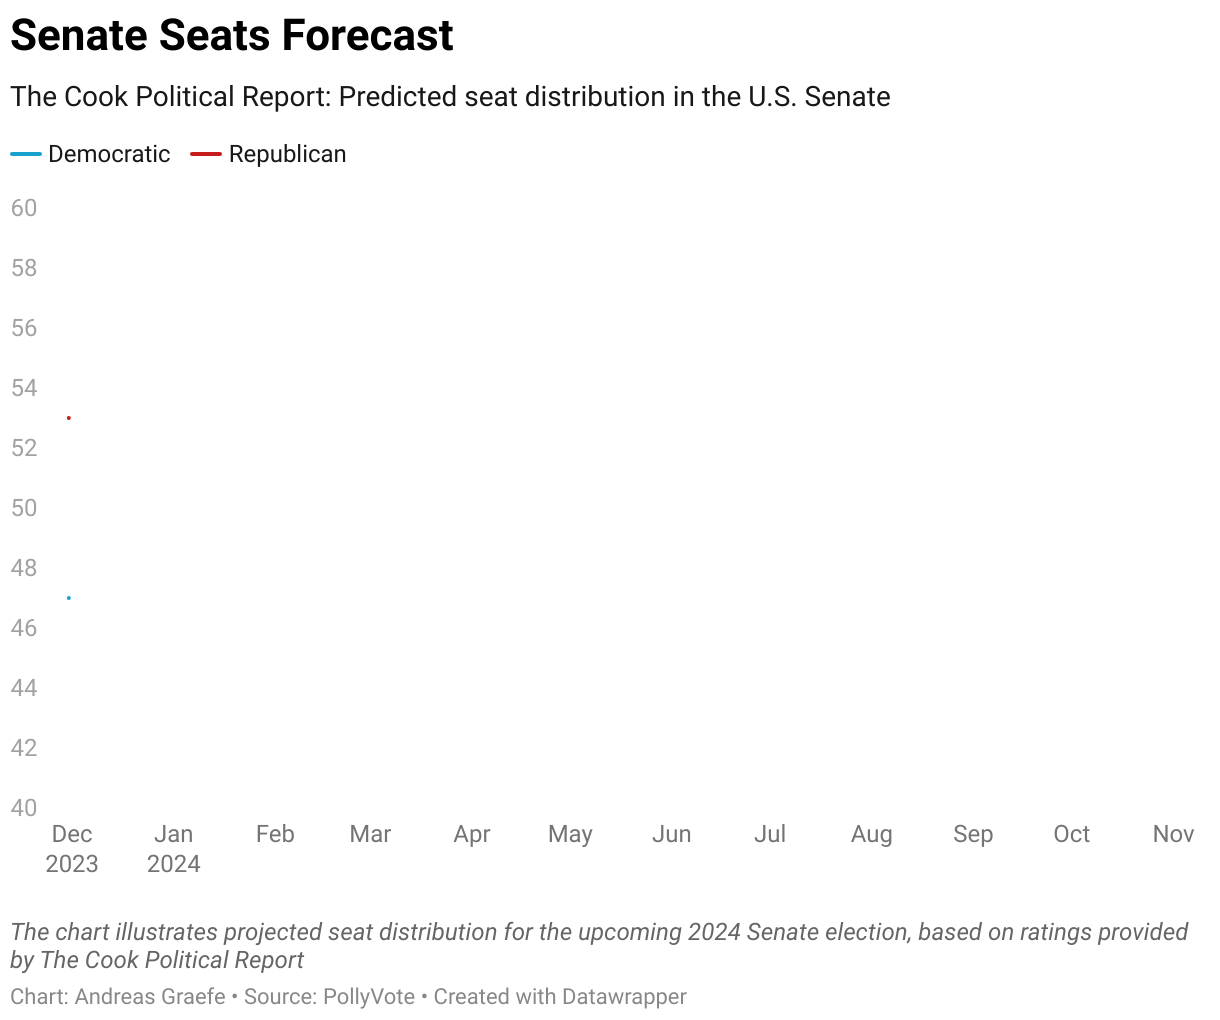 The chart illustrates projected seat distribution for the upcoming 2024 Senate election, based on ratings provided by The Cook Political Report